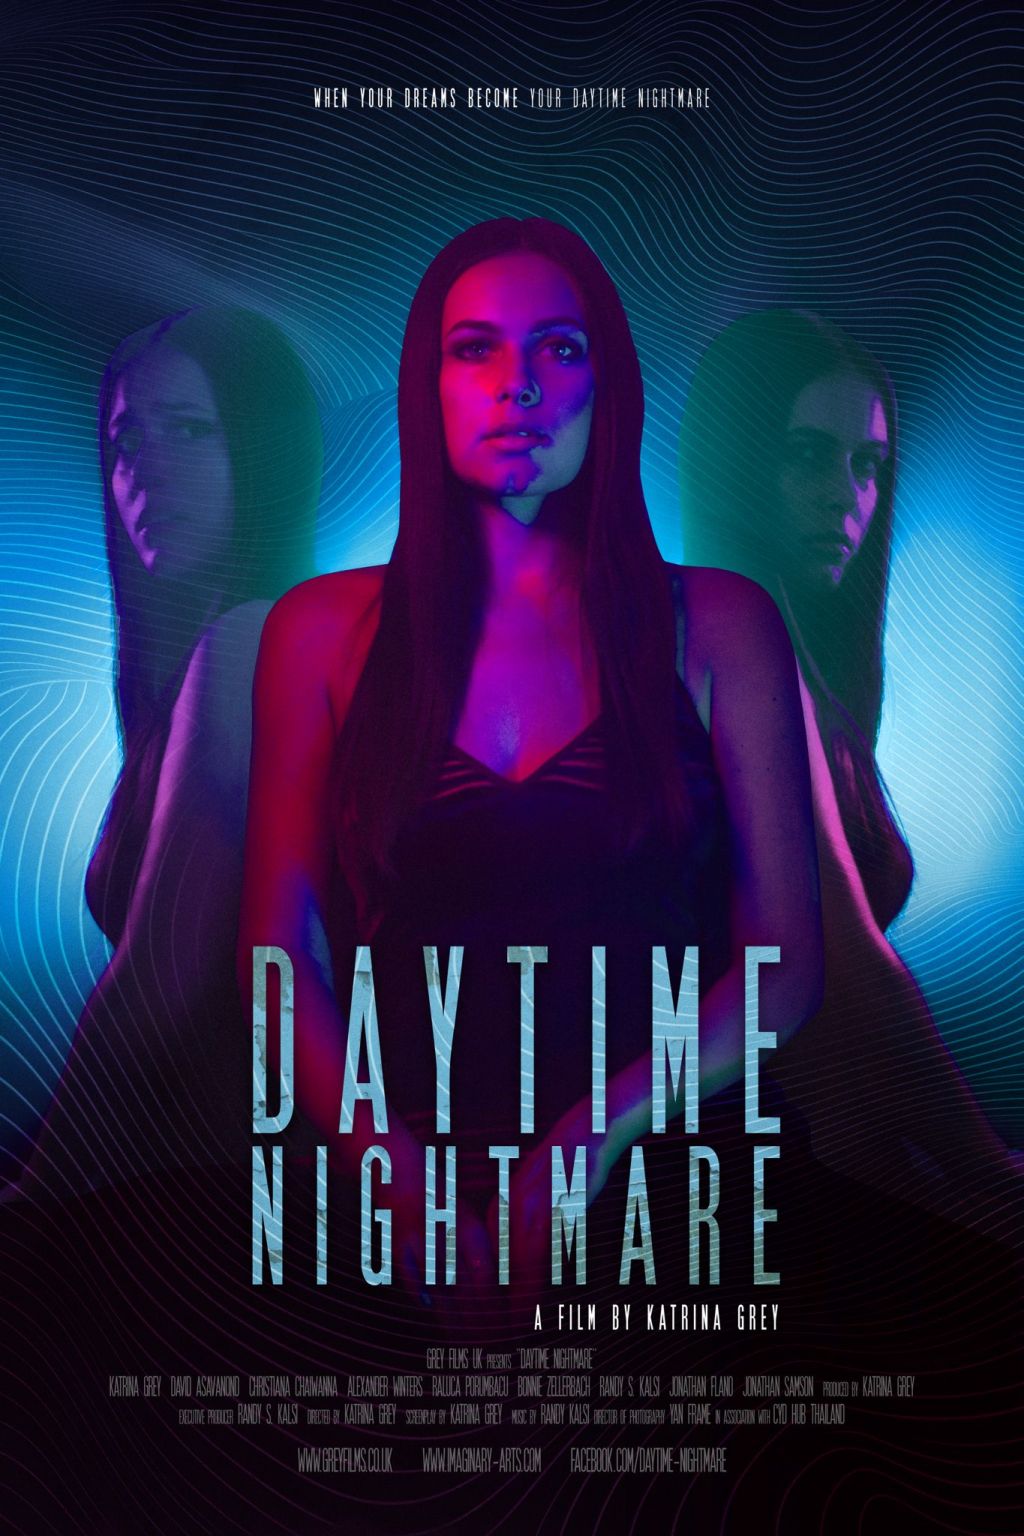 Daytime Nightmare Review — Independent horror film full of surprises